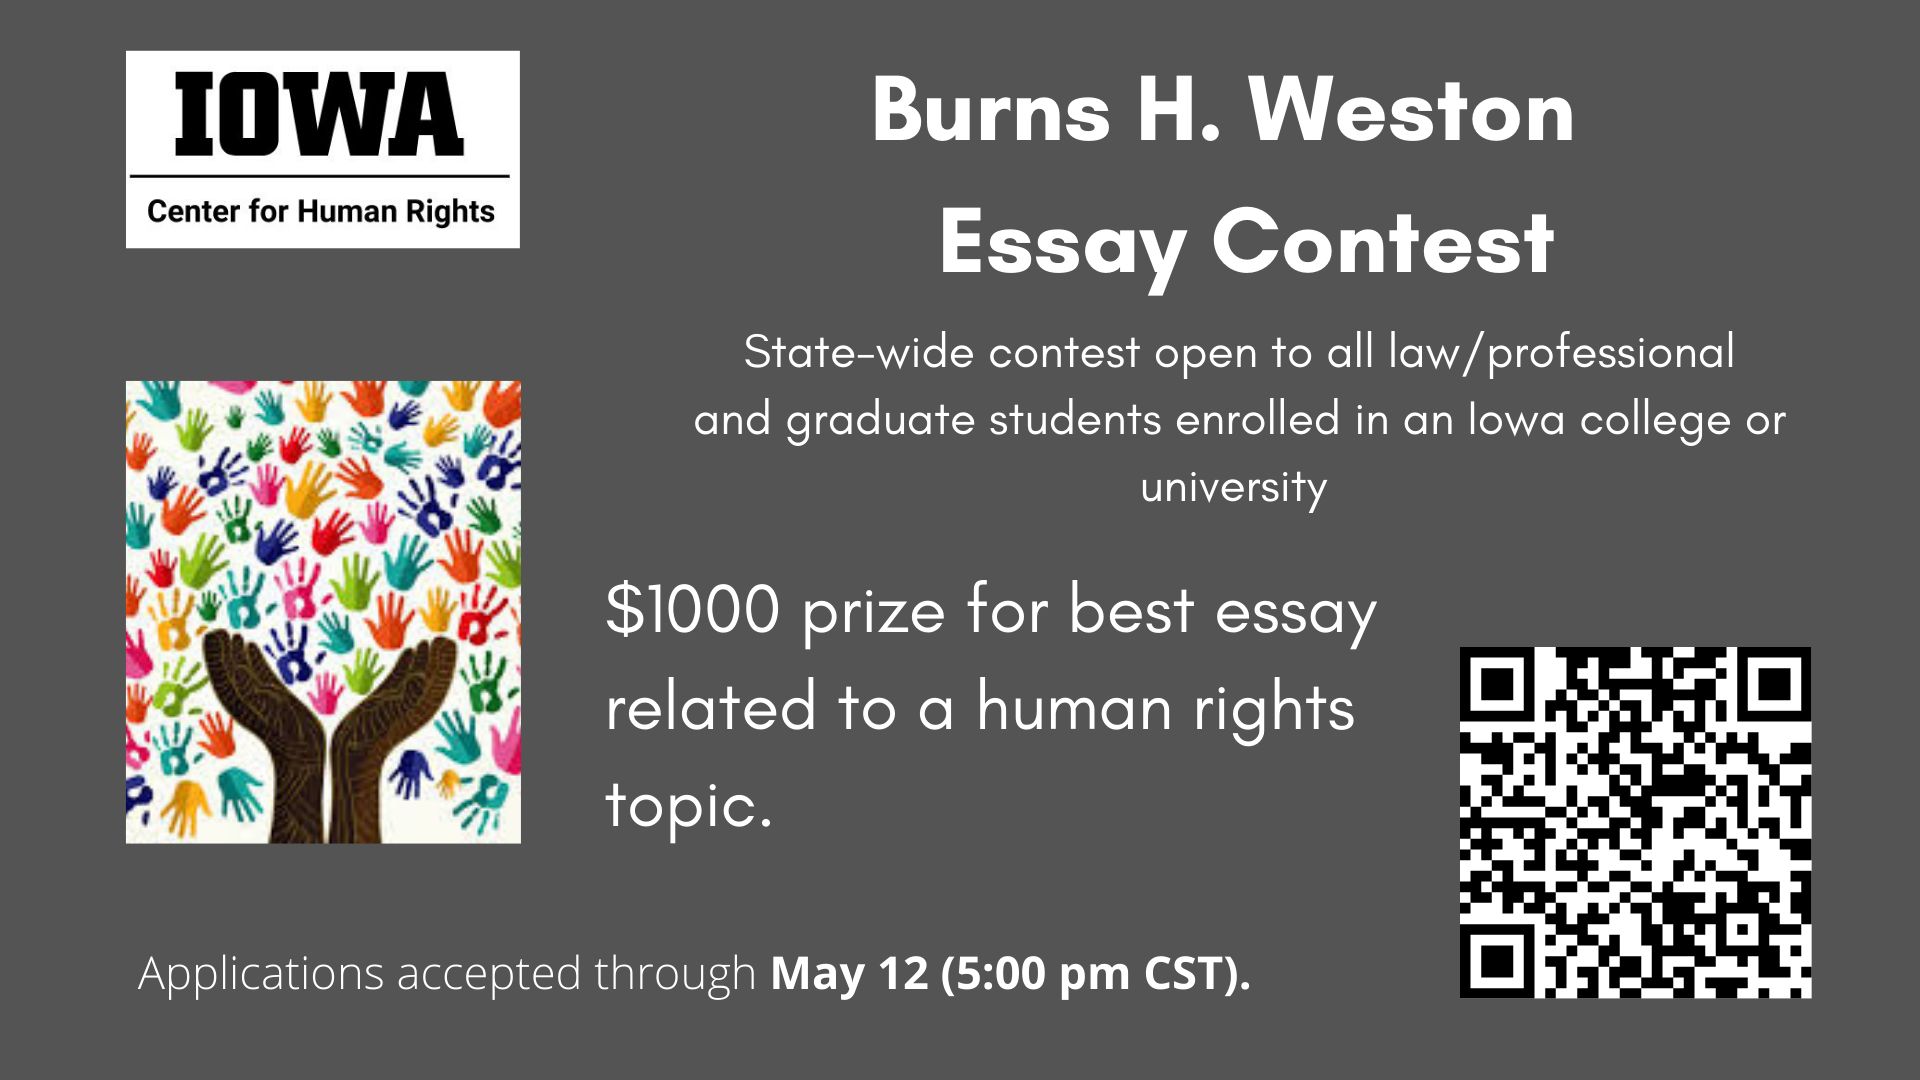  UI Center for Human Rights        Burns H. Weston Essay Contest    State-wide contest open to all law/professional and graduate students enrolled in an Iowa college or university.        $1000 prize for best essay related to a human rights topic.        Applications accepted through May 12 (5:00 pm CST).